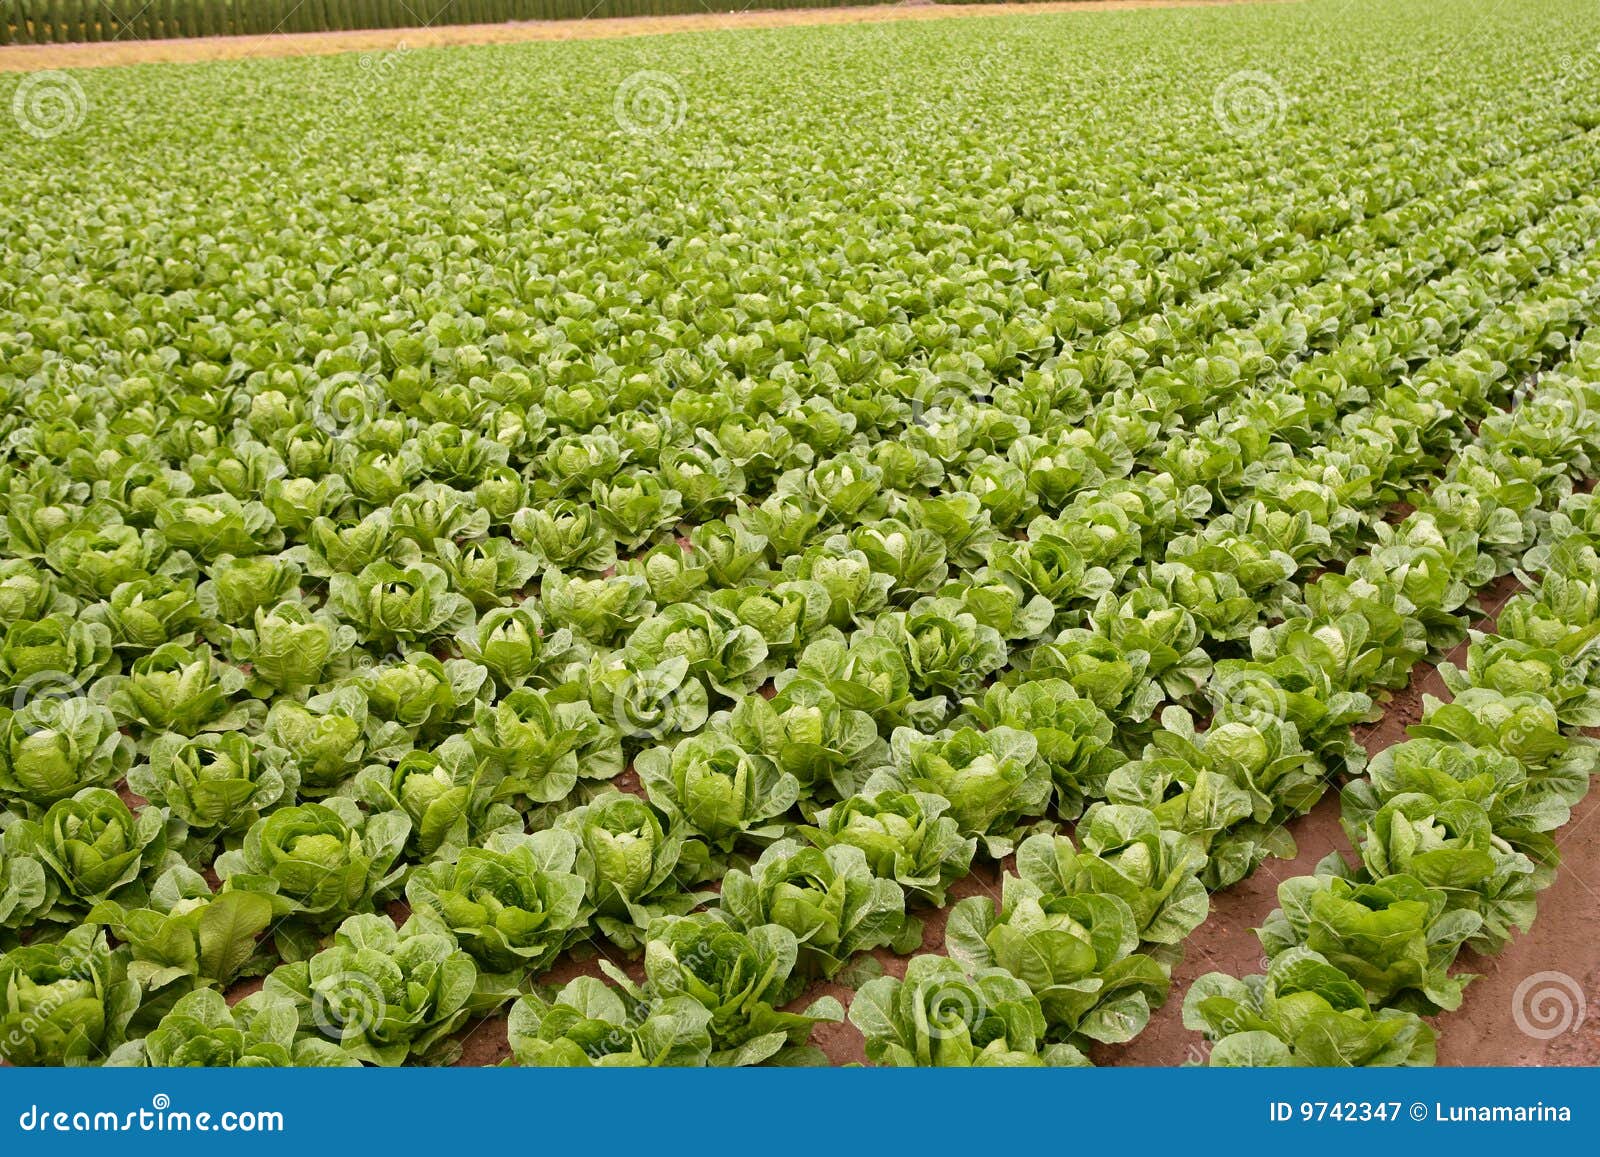 cabbage fields, rows of vegetable food